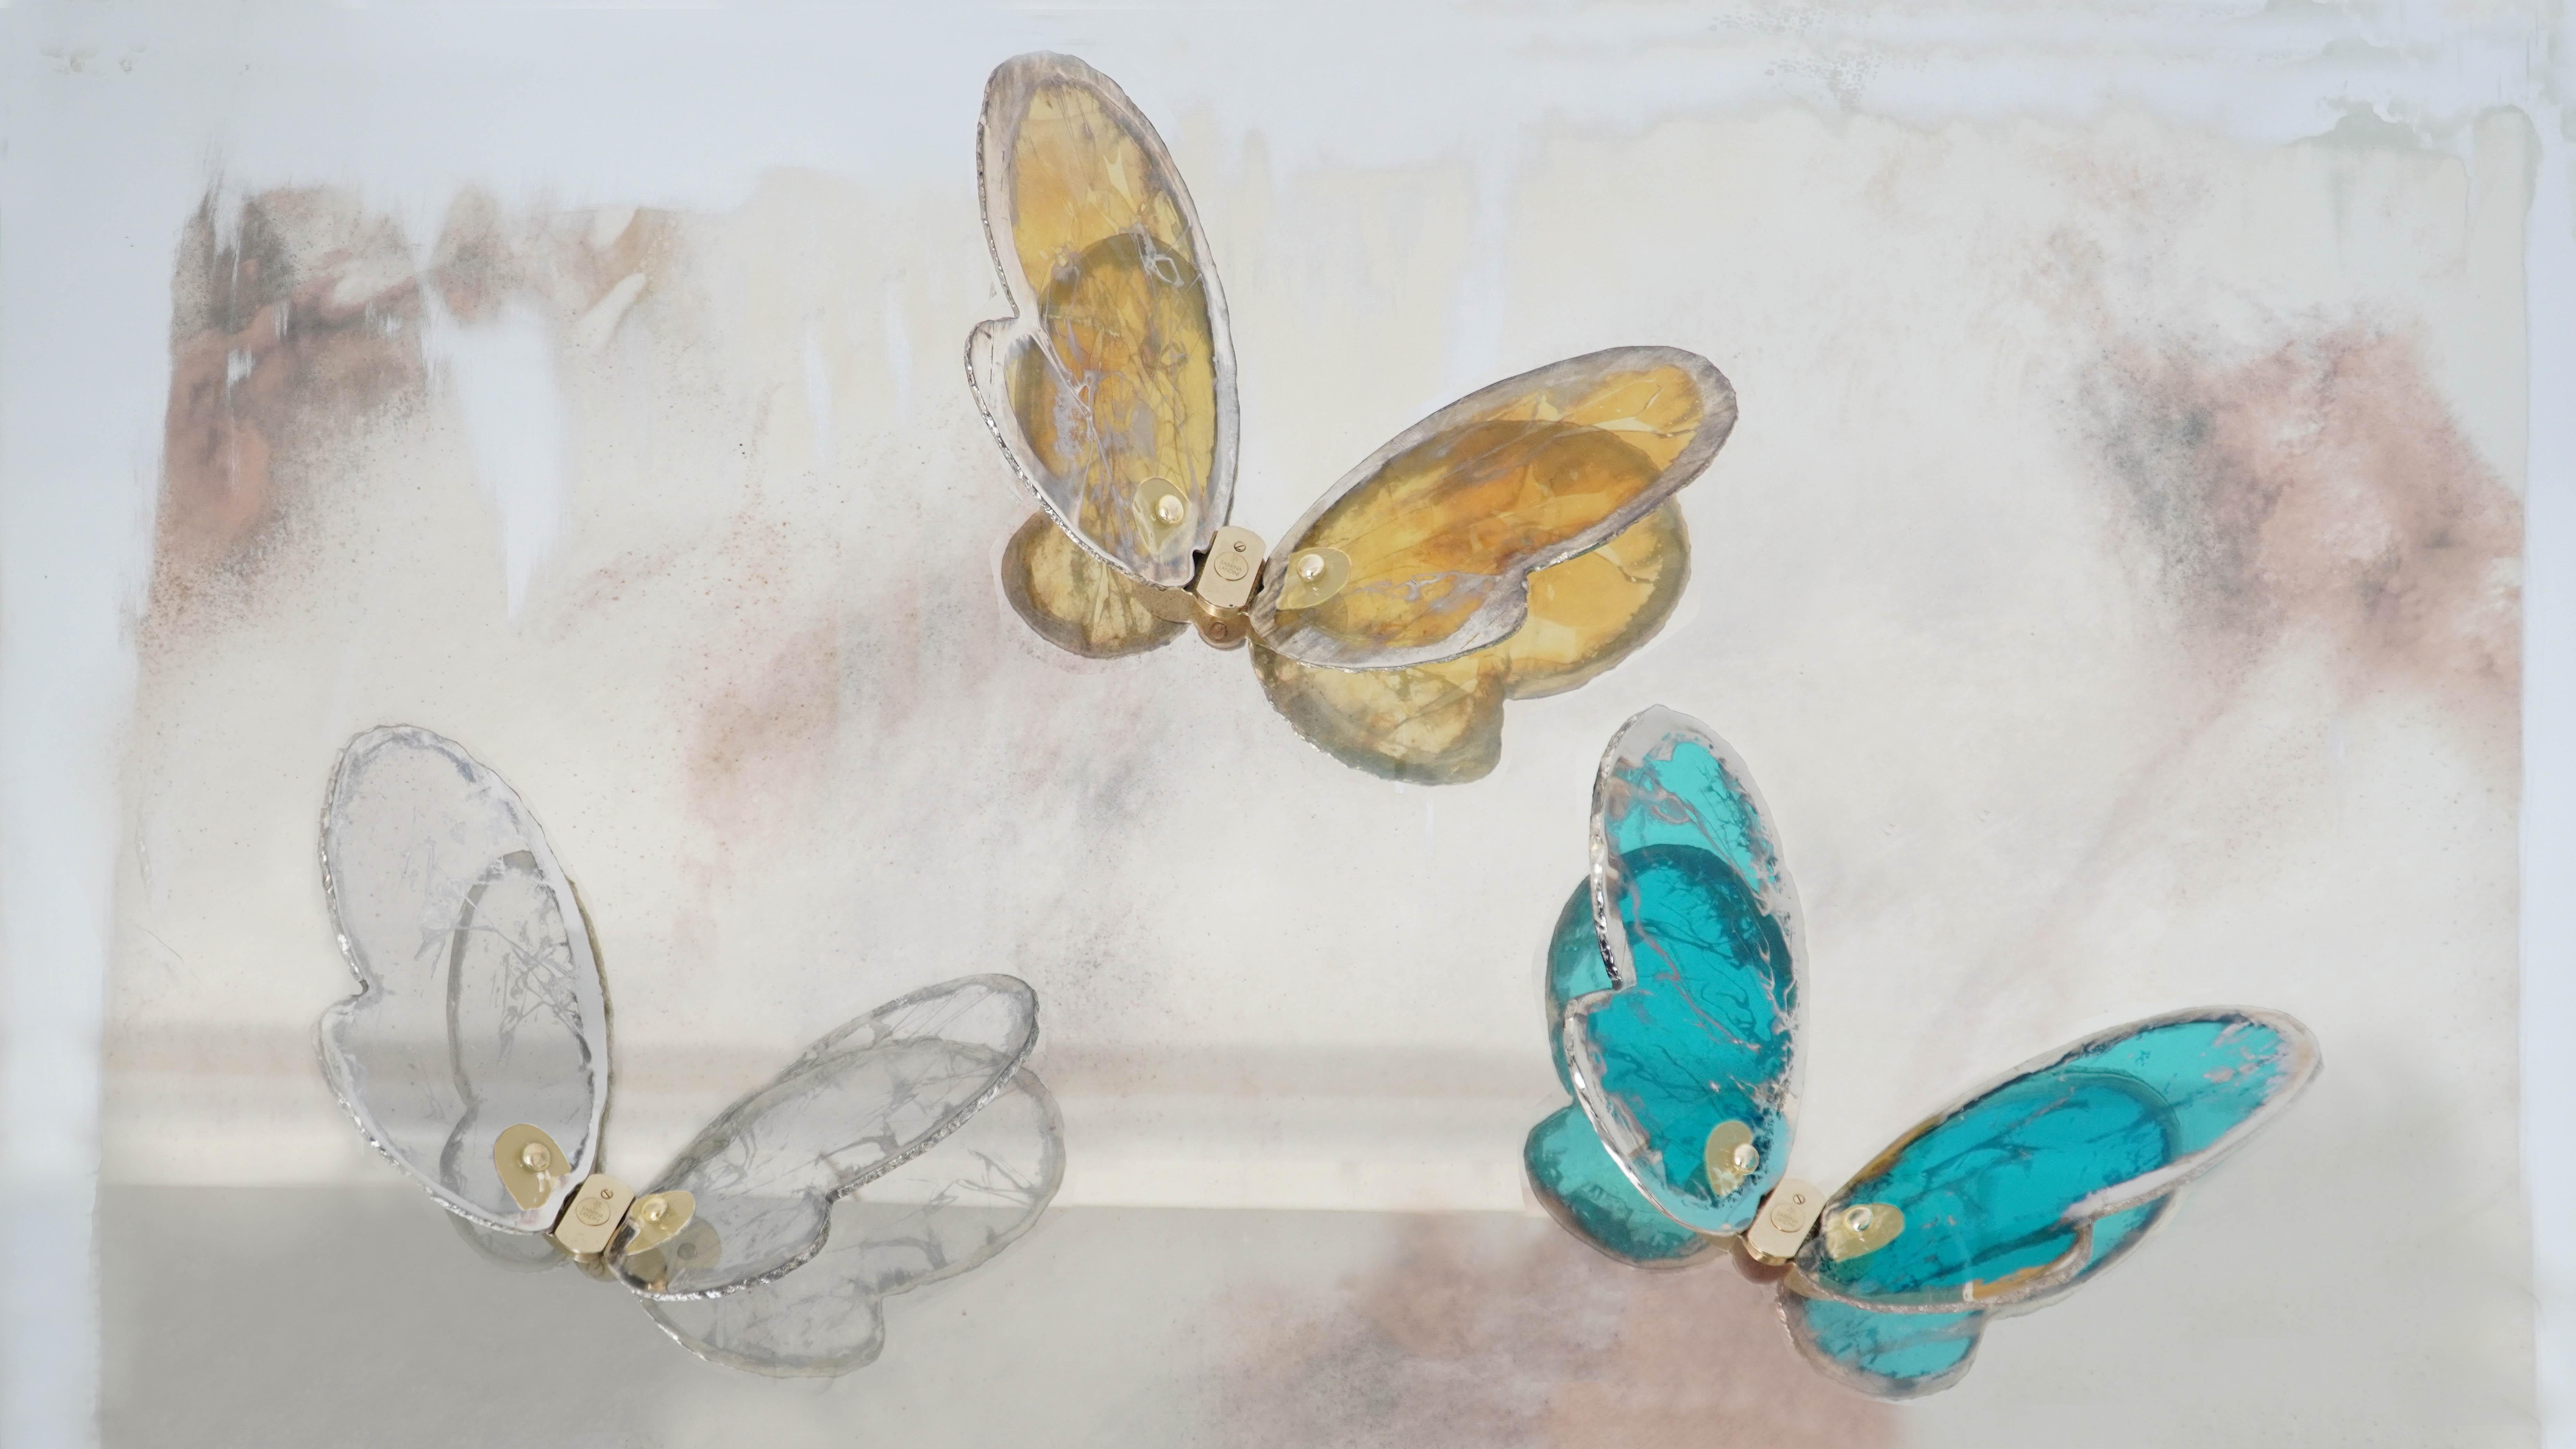 Butterfly Contemporary Wall Flight Sculpture, Art Silvered Glass Aquamarine   In New Condition For Sale In Pietrasanta, IT